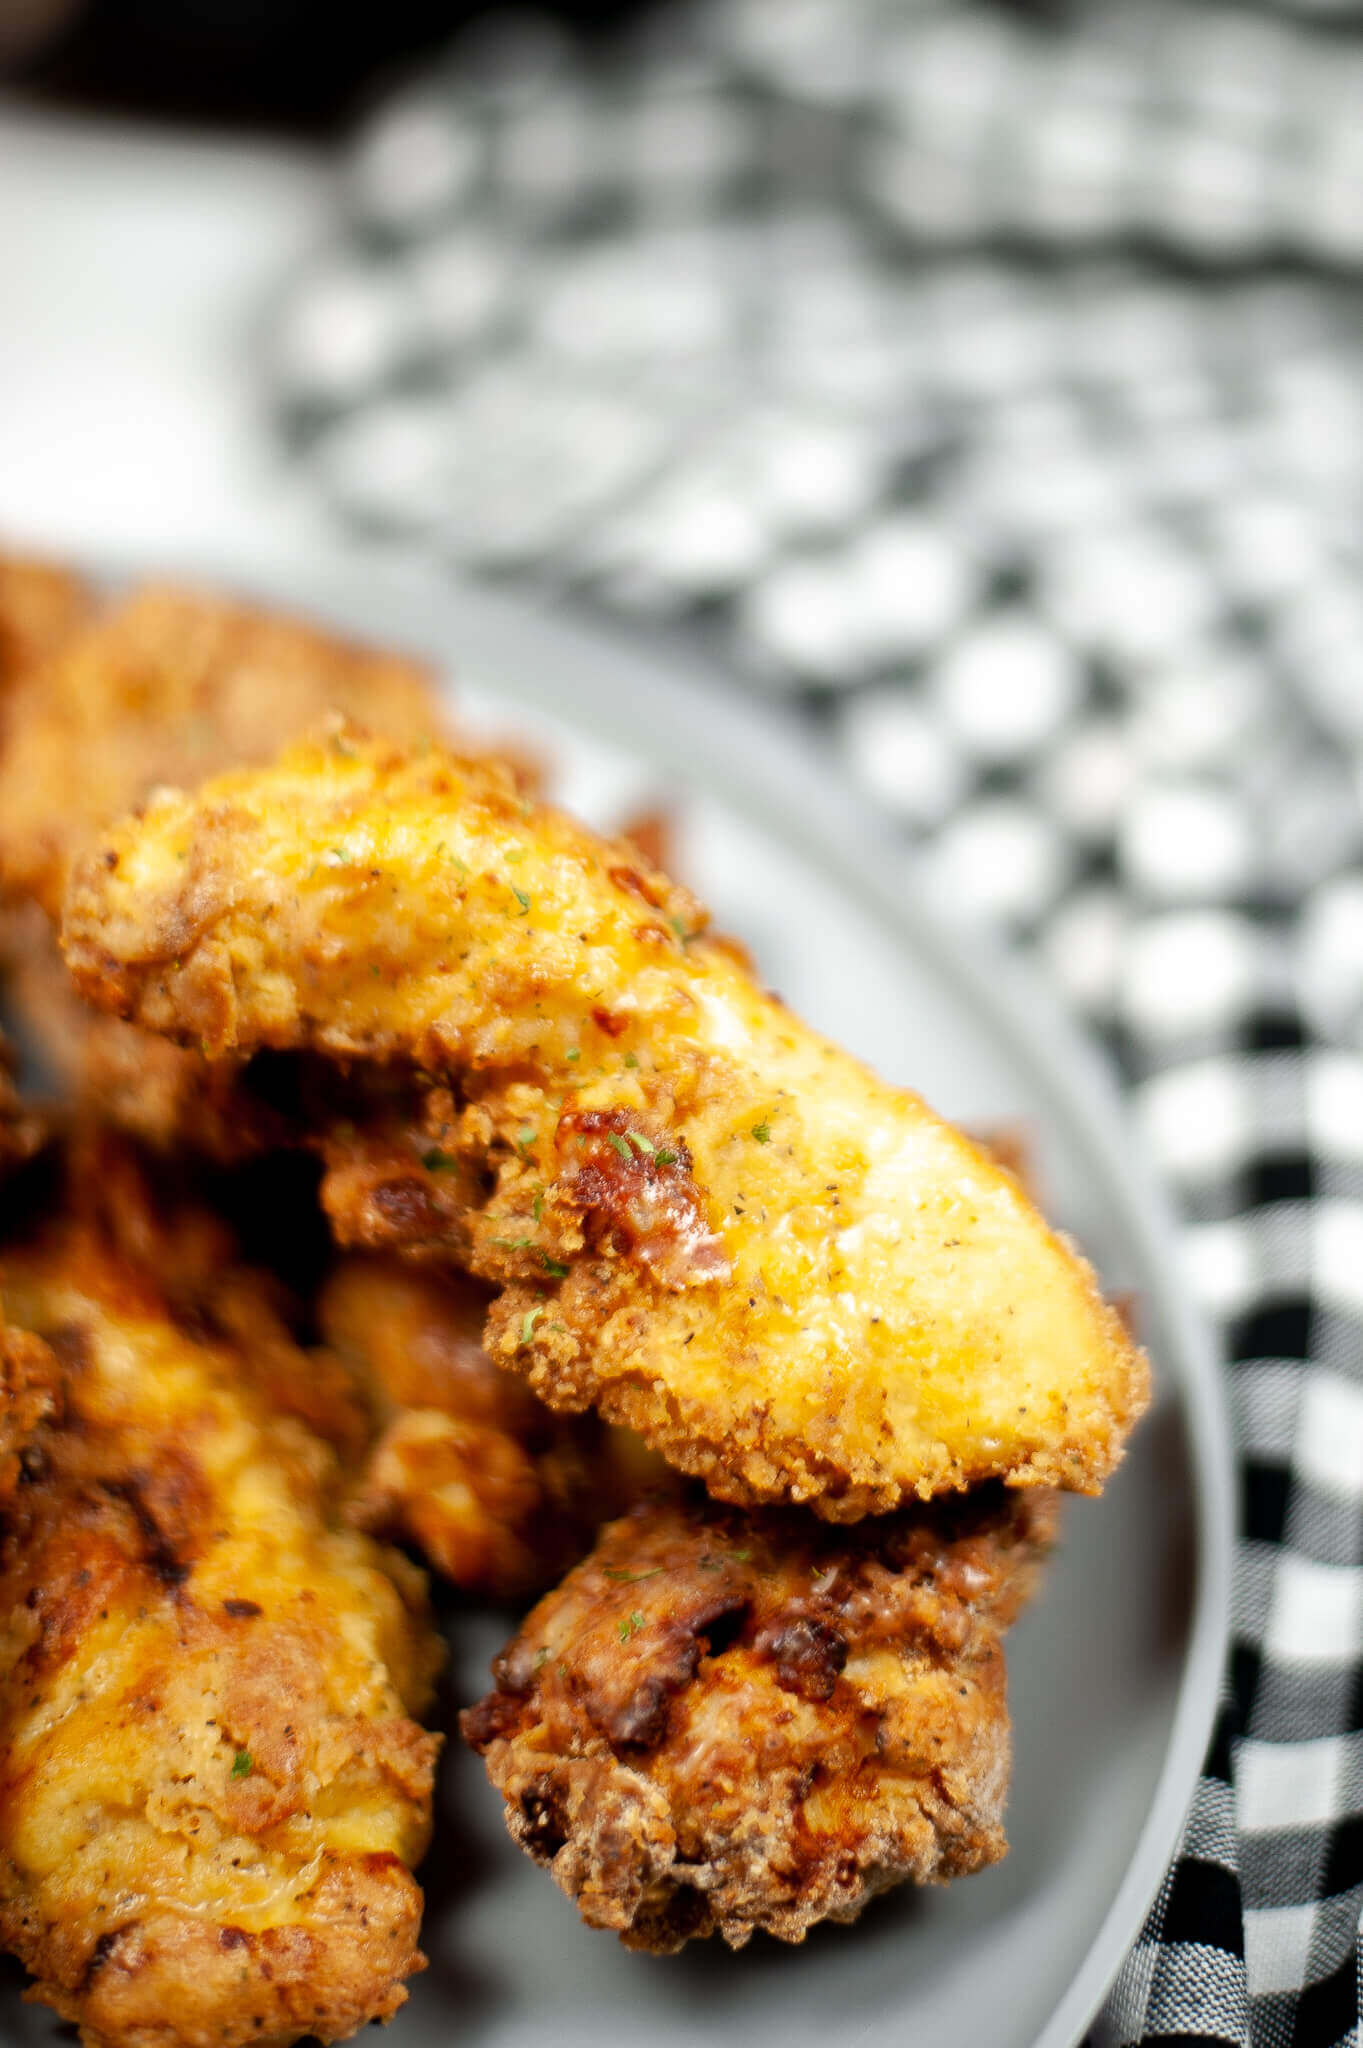 A close up view of the air fryer chicken strips.